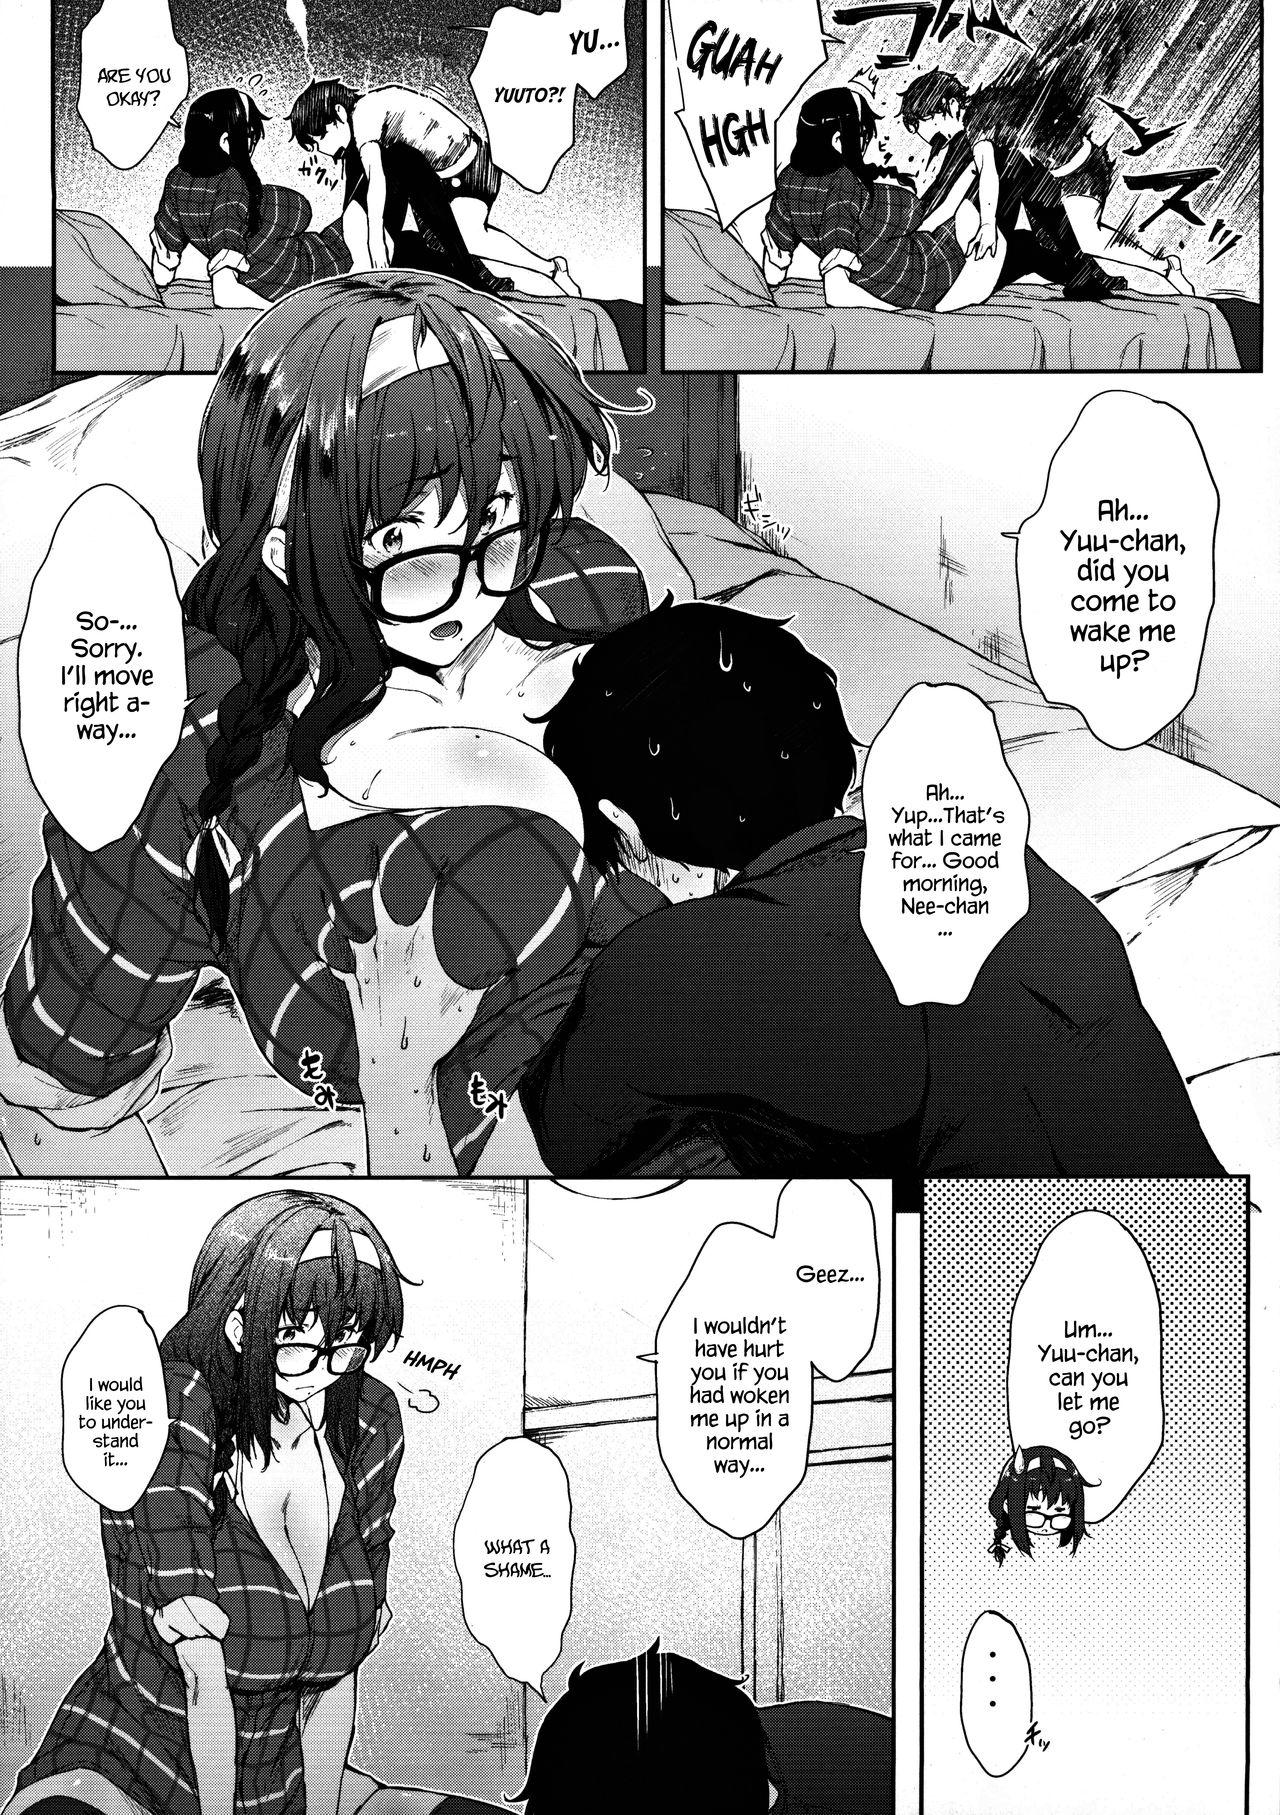 Unshaved Babaa no Inu Ma ni Nee-chan to | With My Stepsister While My Mom's Not Home - Original Curious - Page 5